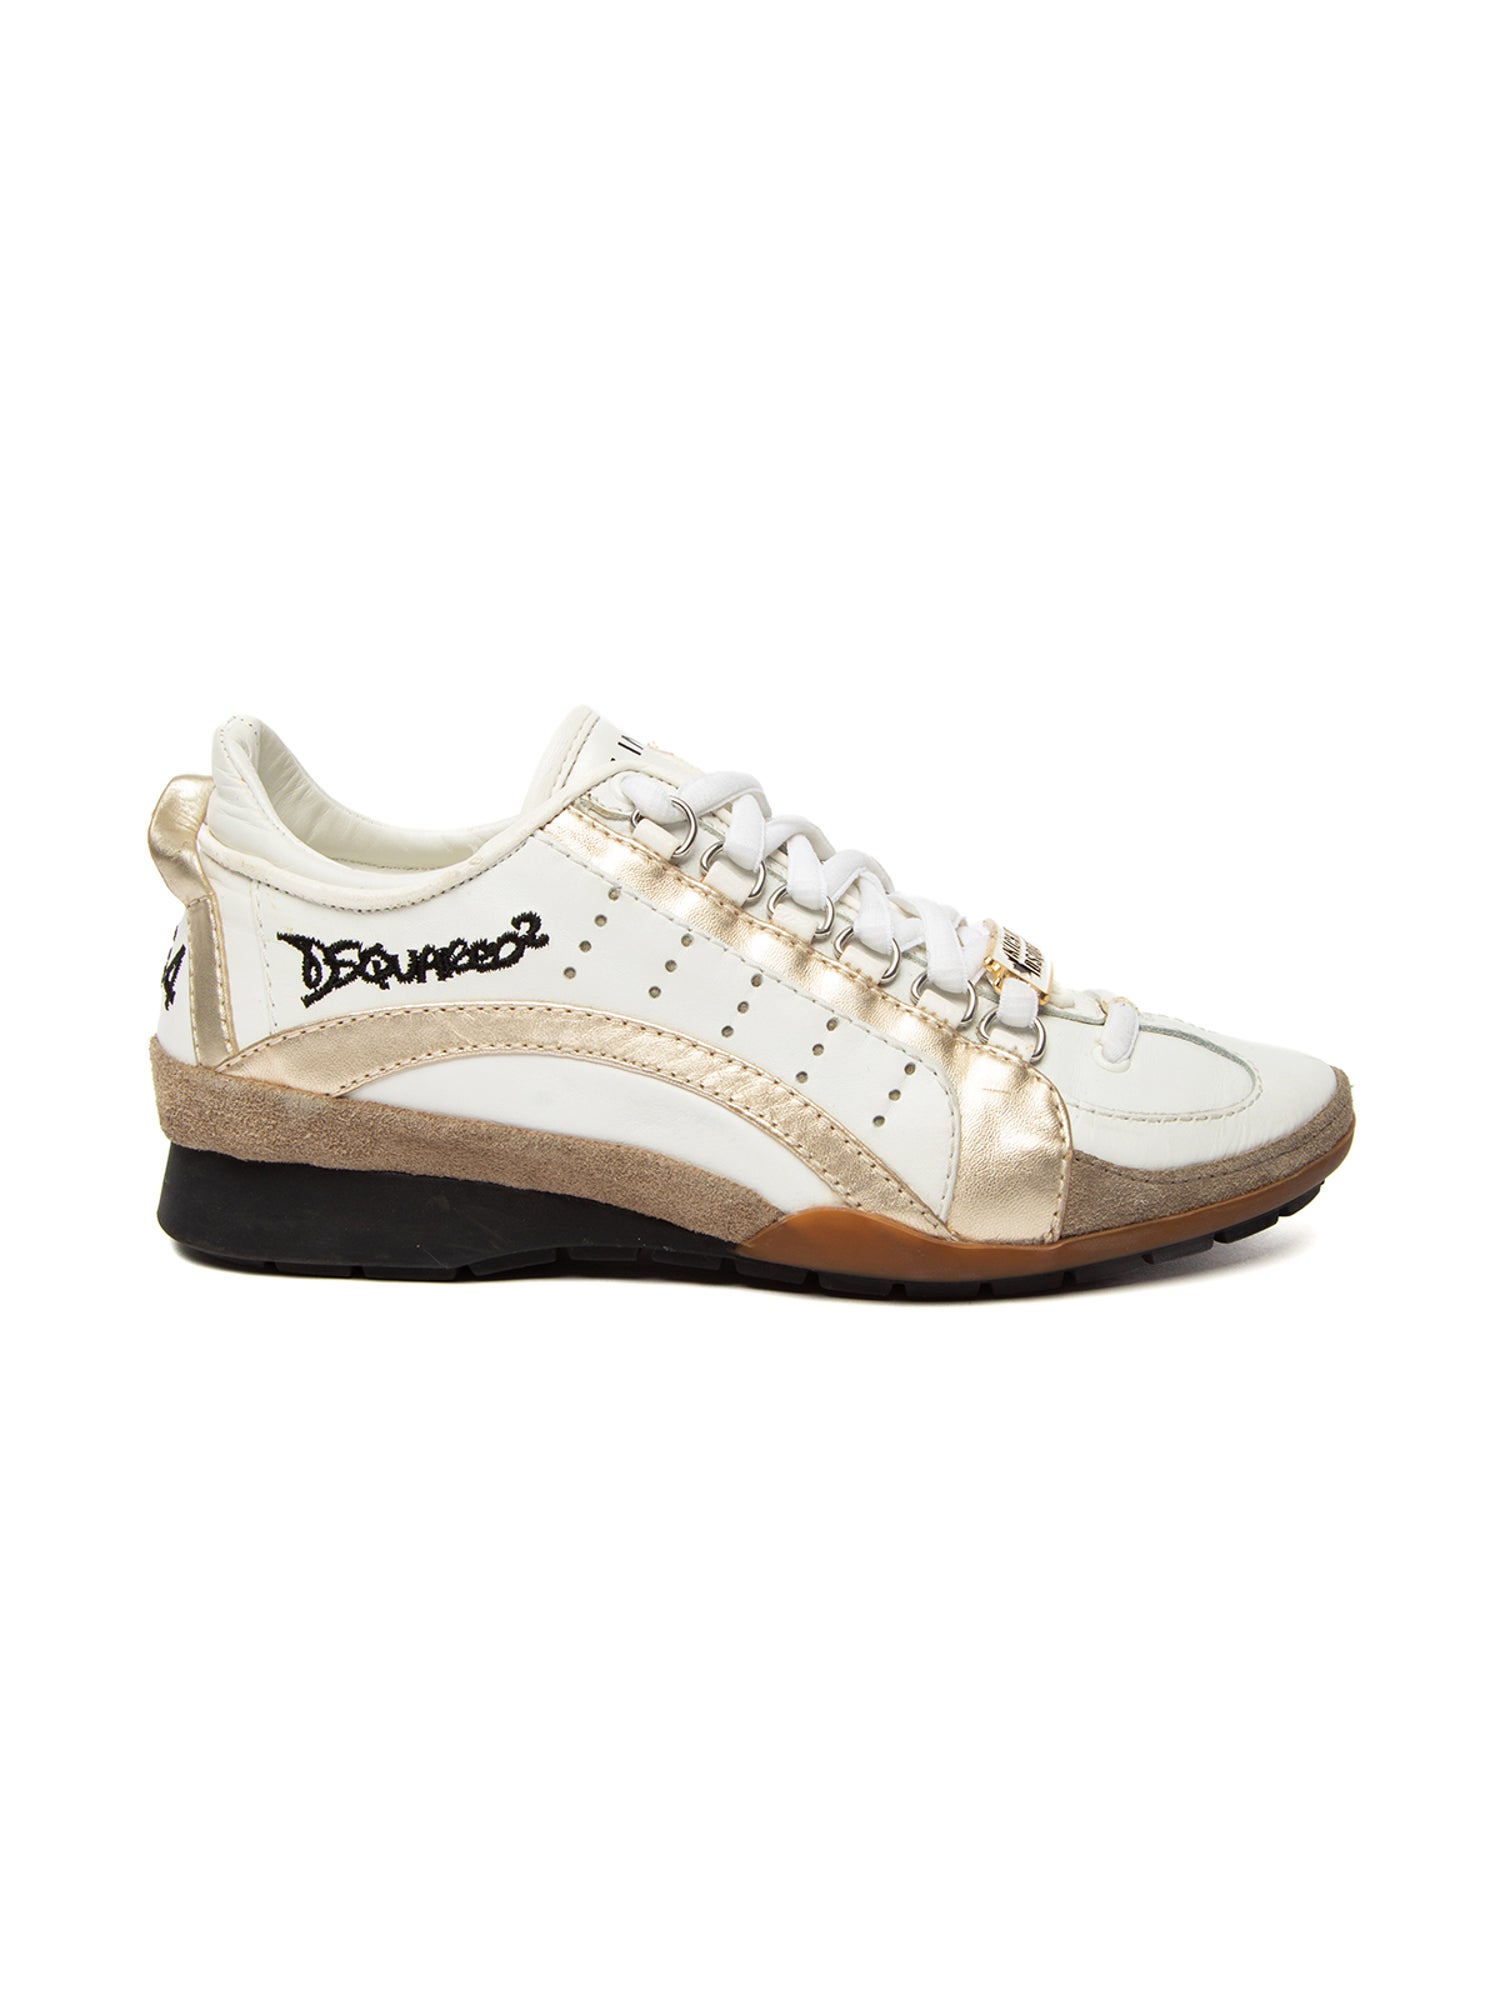 Vintage Dsquared2 Shoes - 19 For at 1stDibs | dsquared2 shoes sale, dsquared shoes, dsquared2 sneakers sale